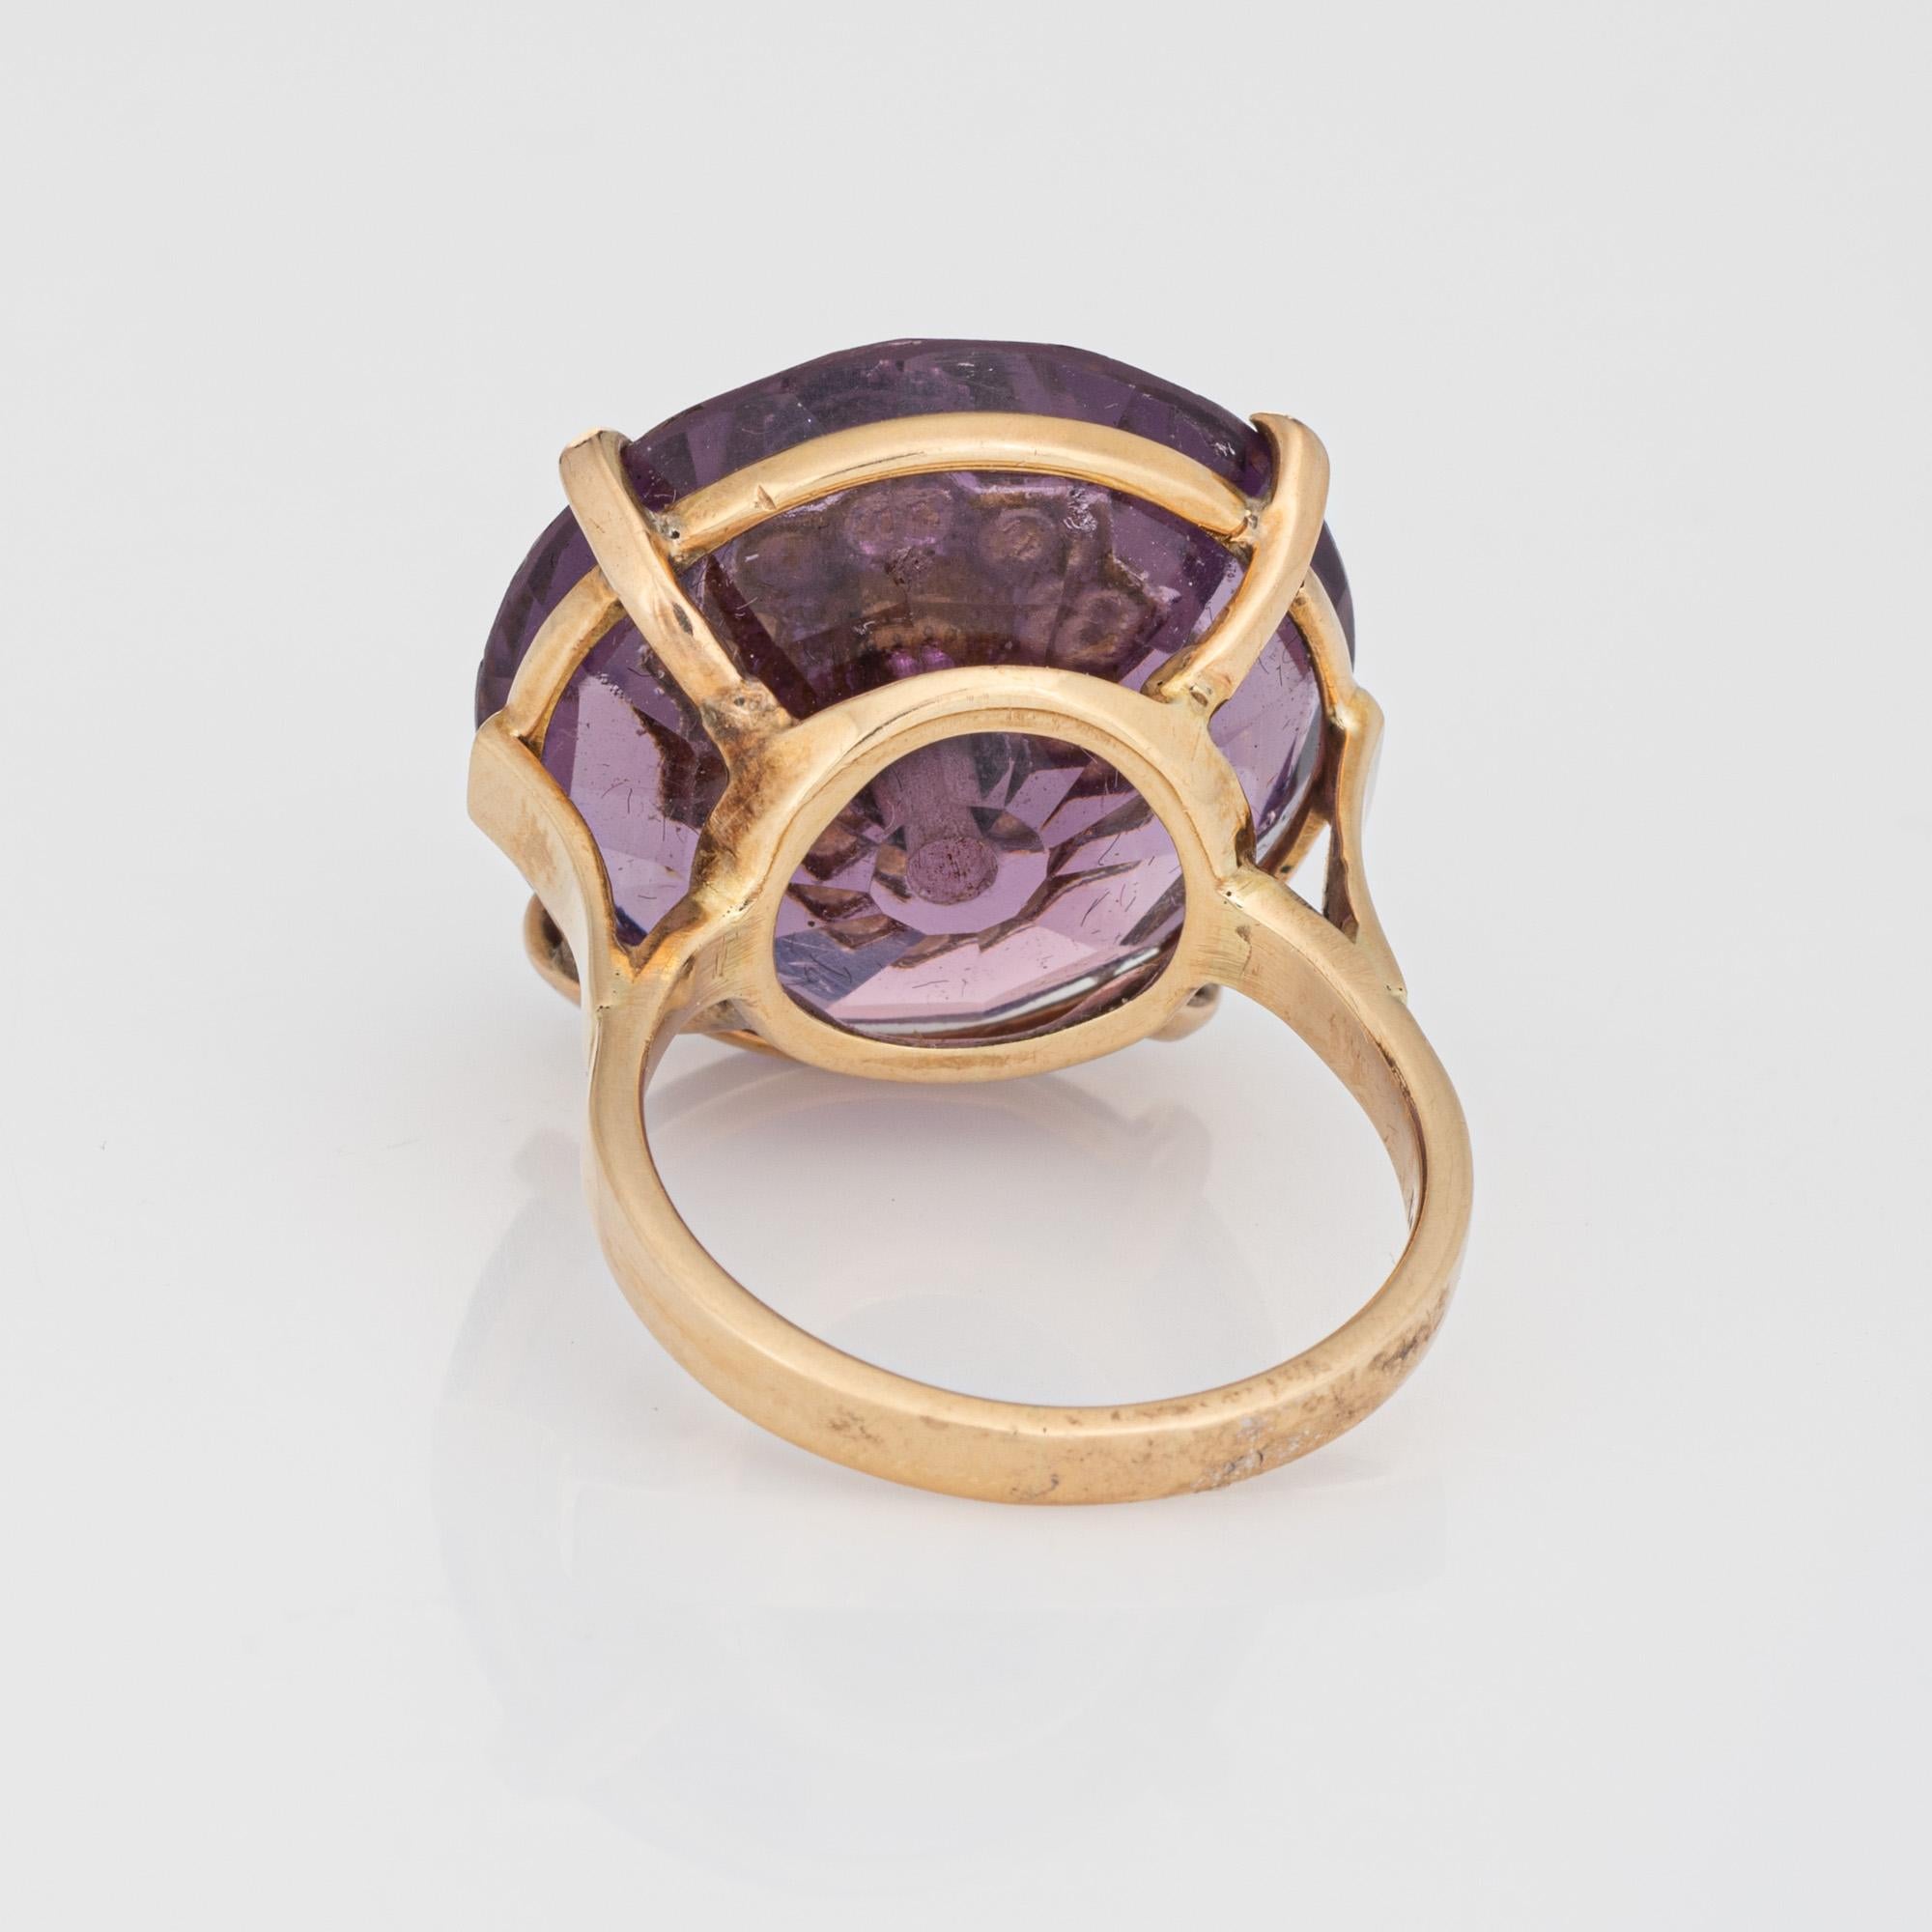 Round Cut Amethyst Seed Pearl Ring Vintage 14k Yellow Gold Estate Fine Jewelry For Sale